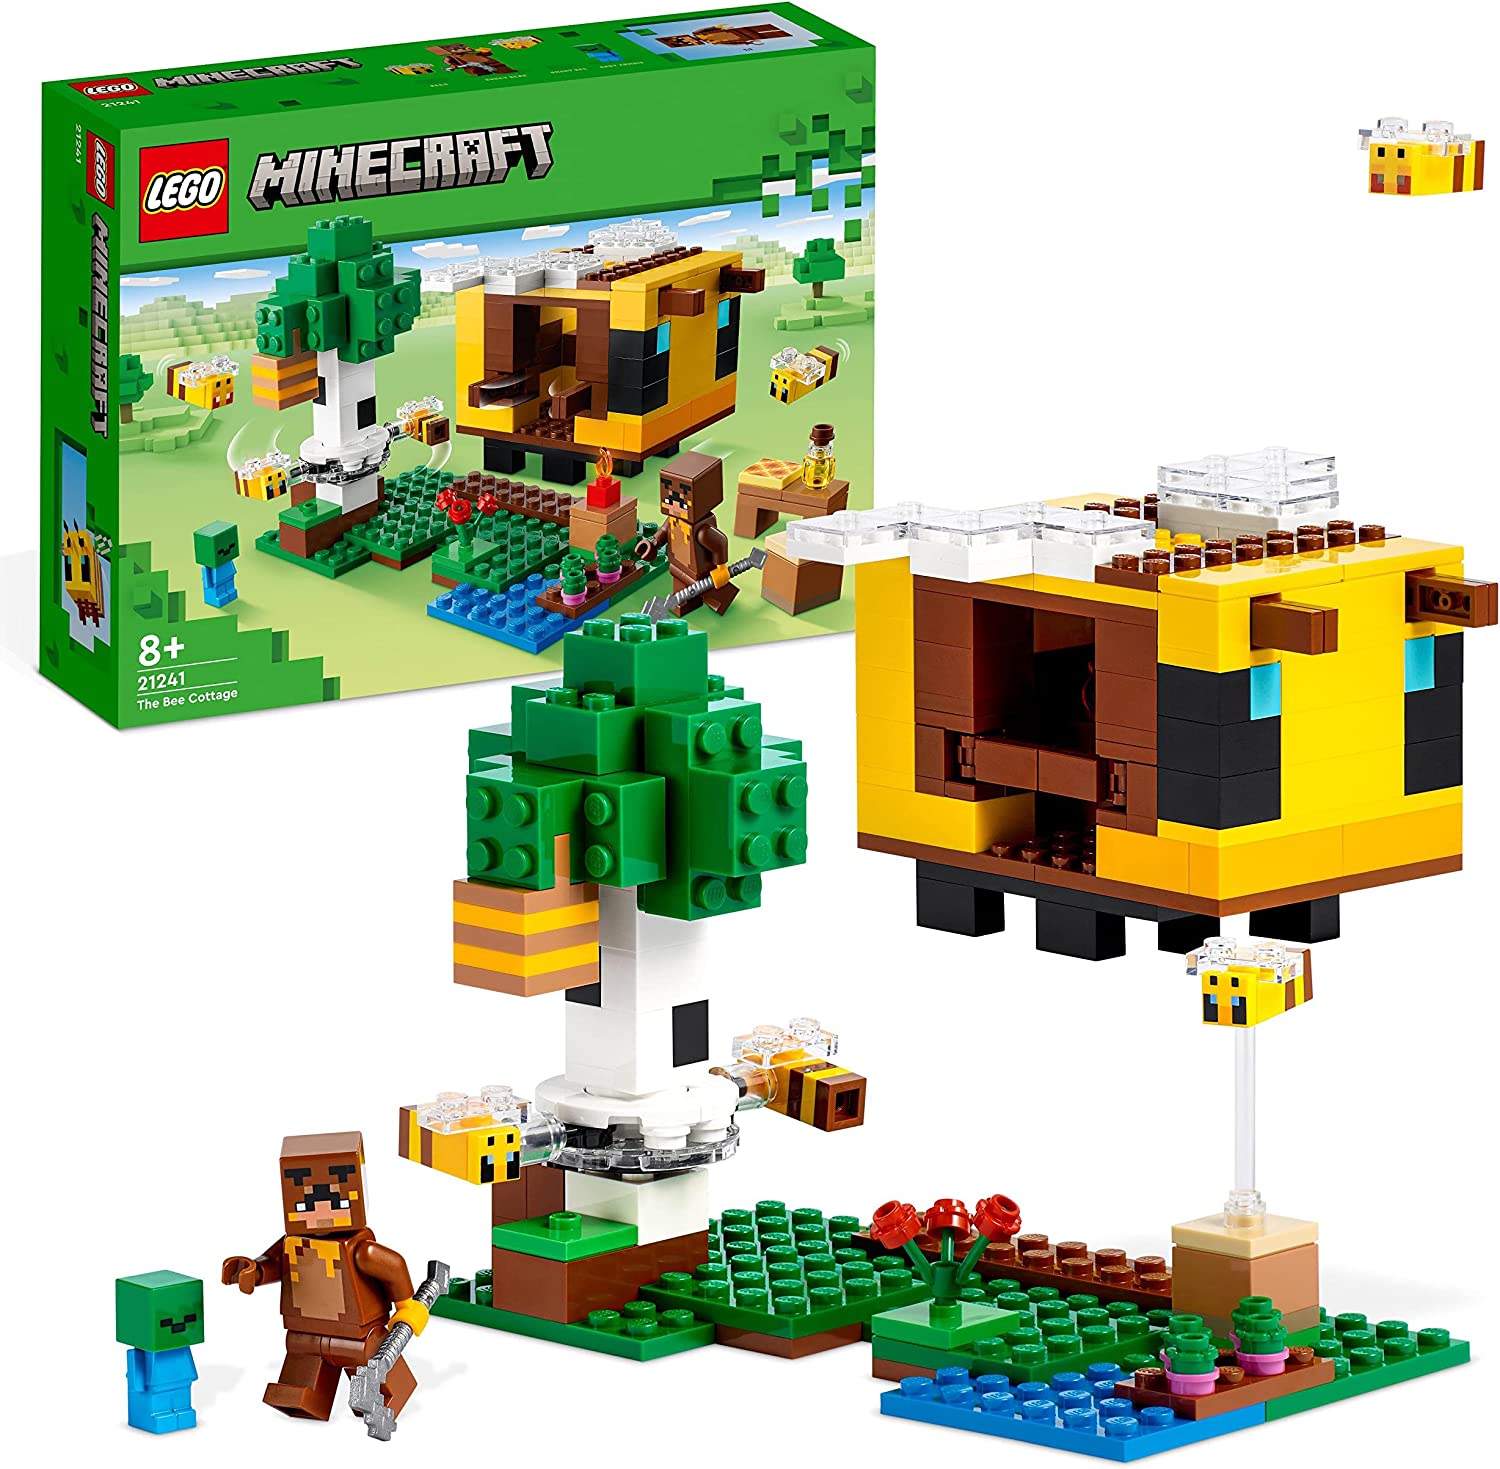 LEGO 21241 Minecraft The Bee House, Farm Toy with Buildable House, Baby Zombie and Animal Figures, Birthday Gift for Boys and Girls